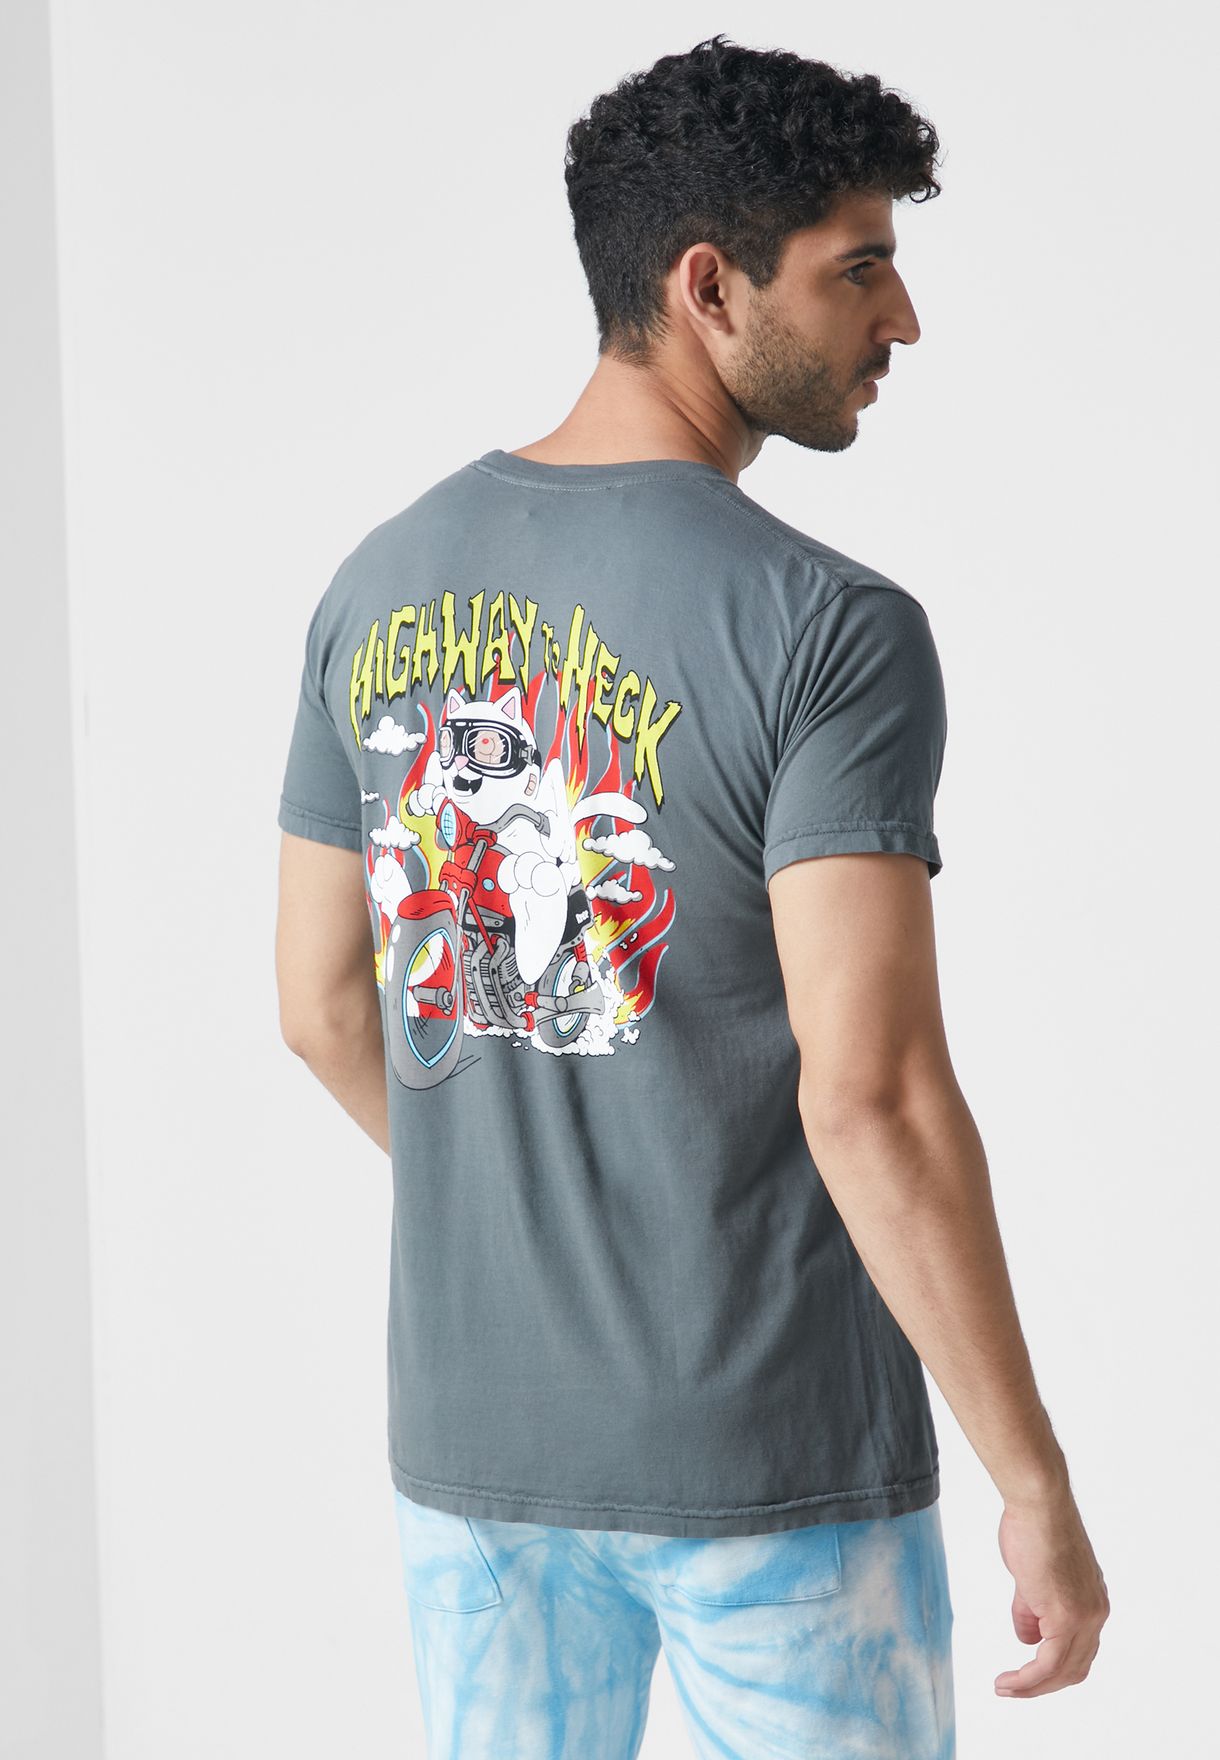 Highway To Heck T-Shirt